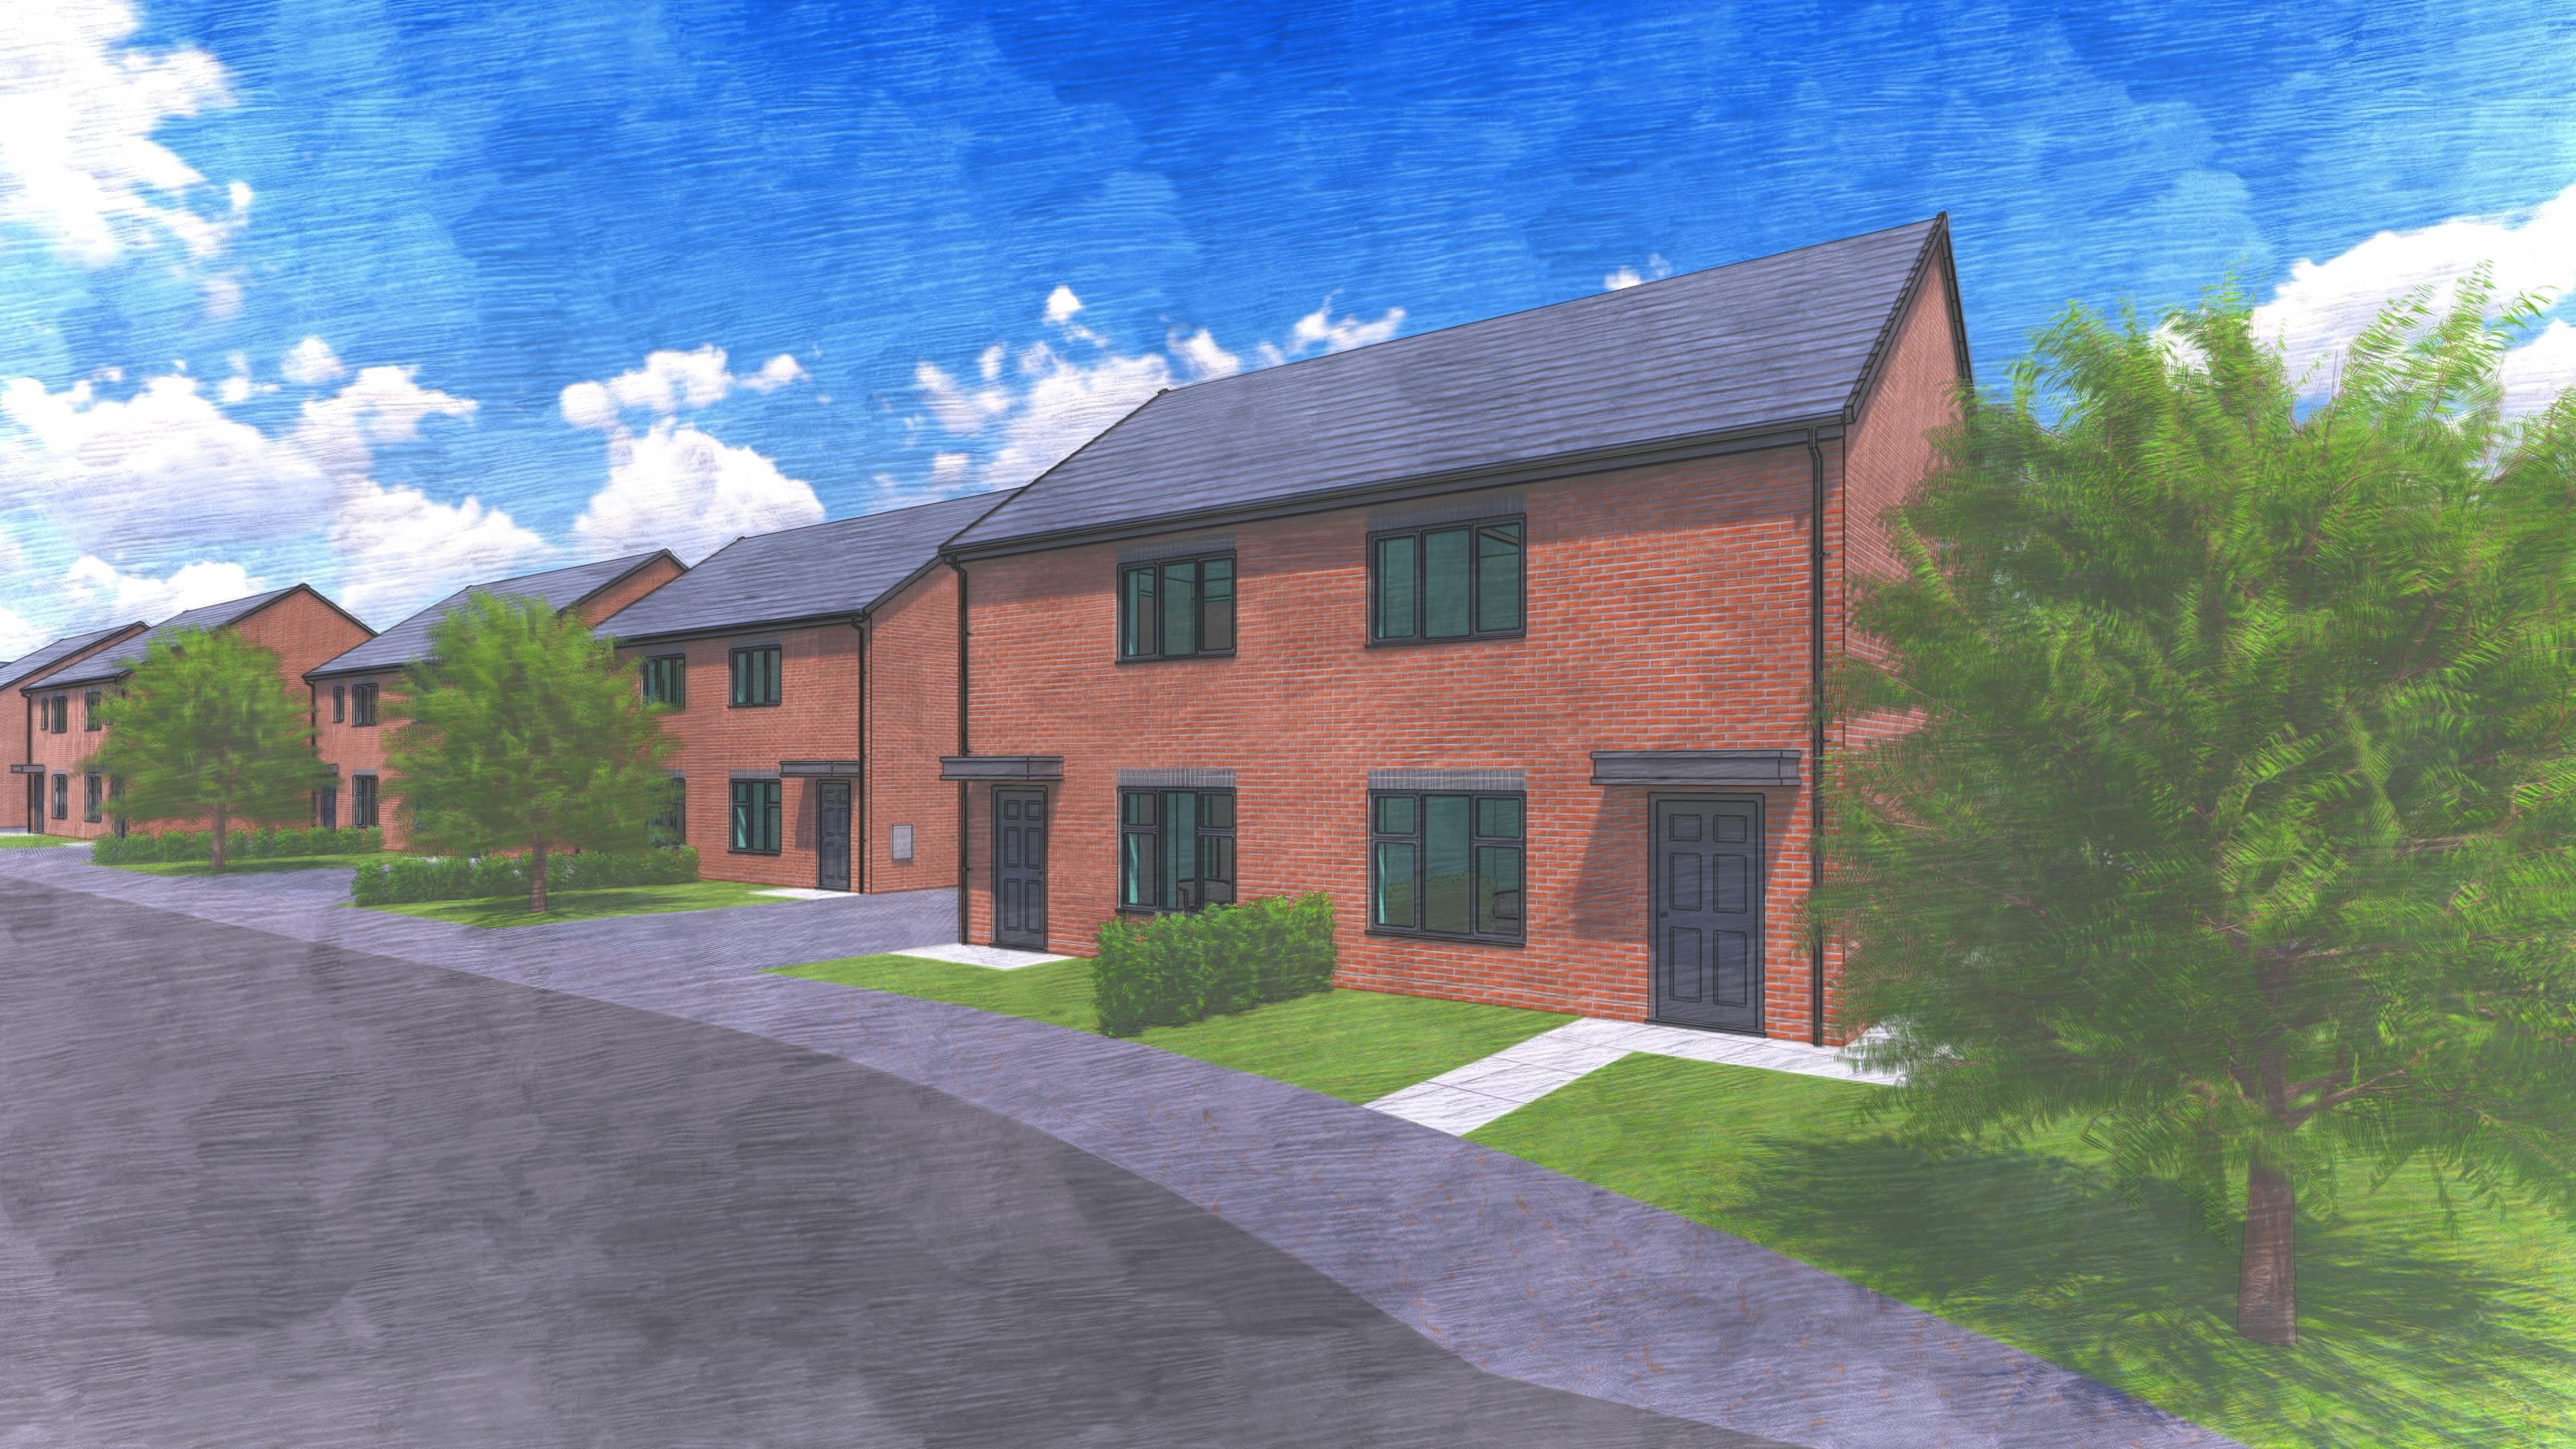 Hough Top Court: Artist's Impression - Views of the proposed residential development from within the site.jpg